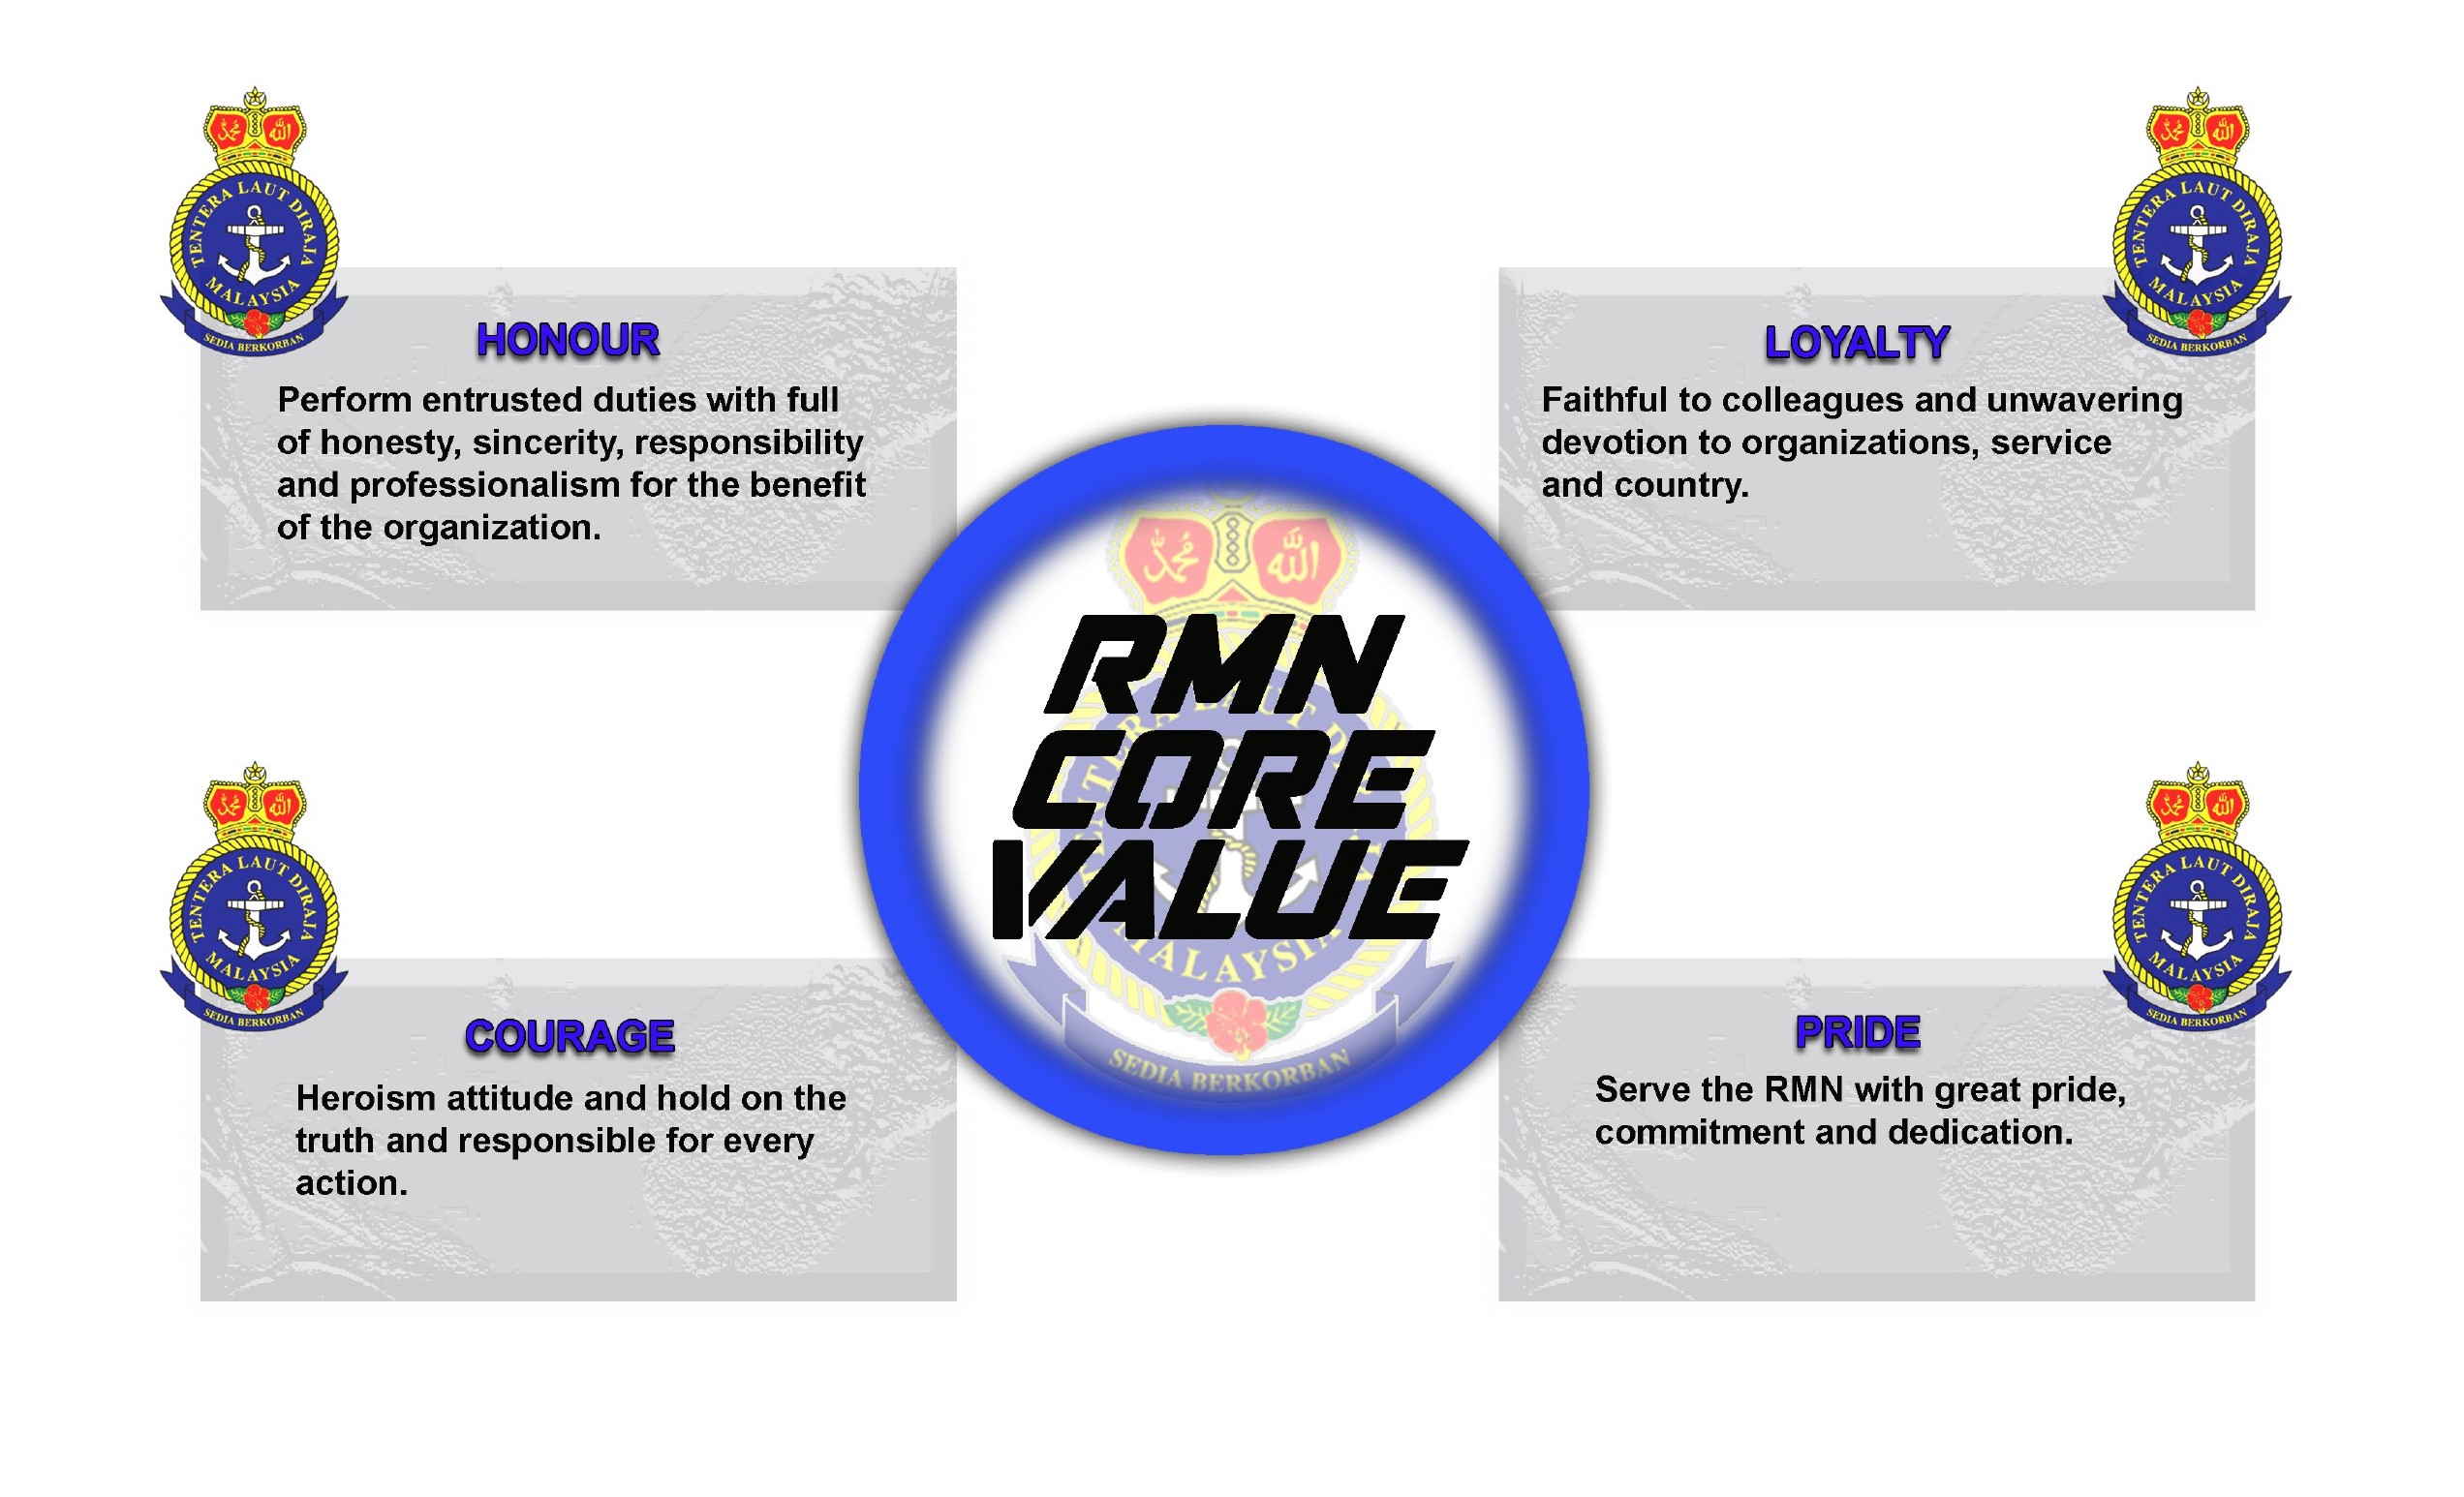 what are the navy core values